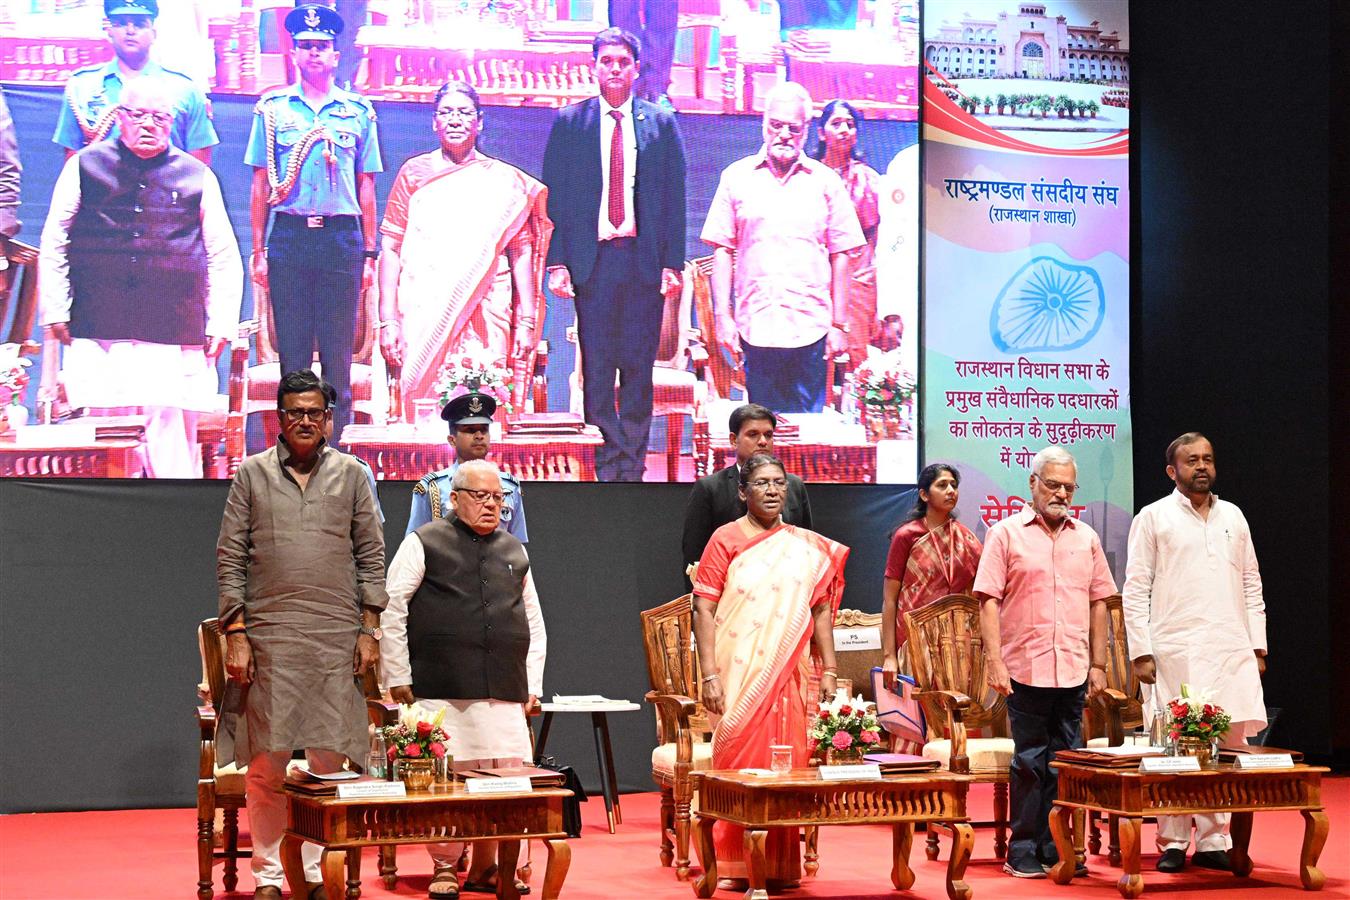 The President of India, Smt Droupadi Murmu addressed a seminar on the 'Role of key constitutional functionaries of Rajasthan Legislature in Strengthening Democracy' at Jaipur on July 14, 2023.